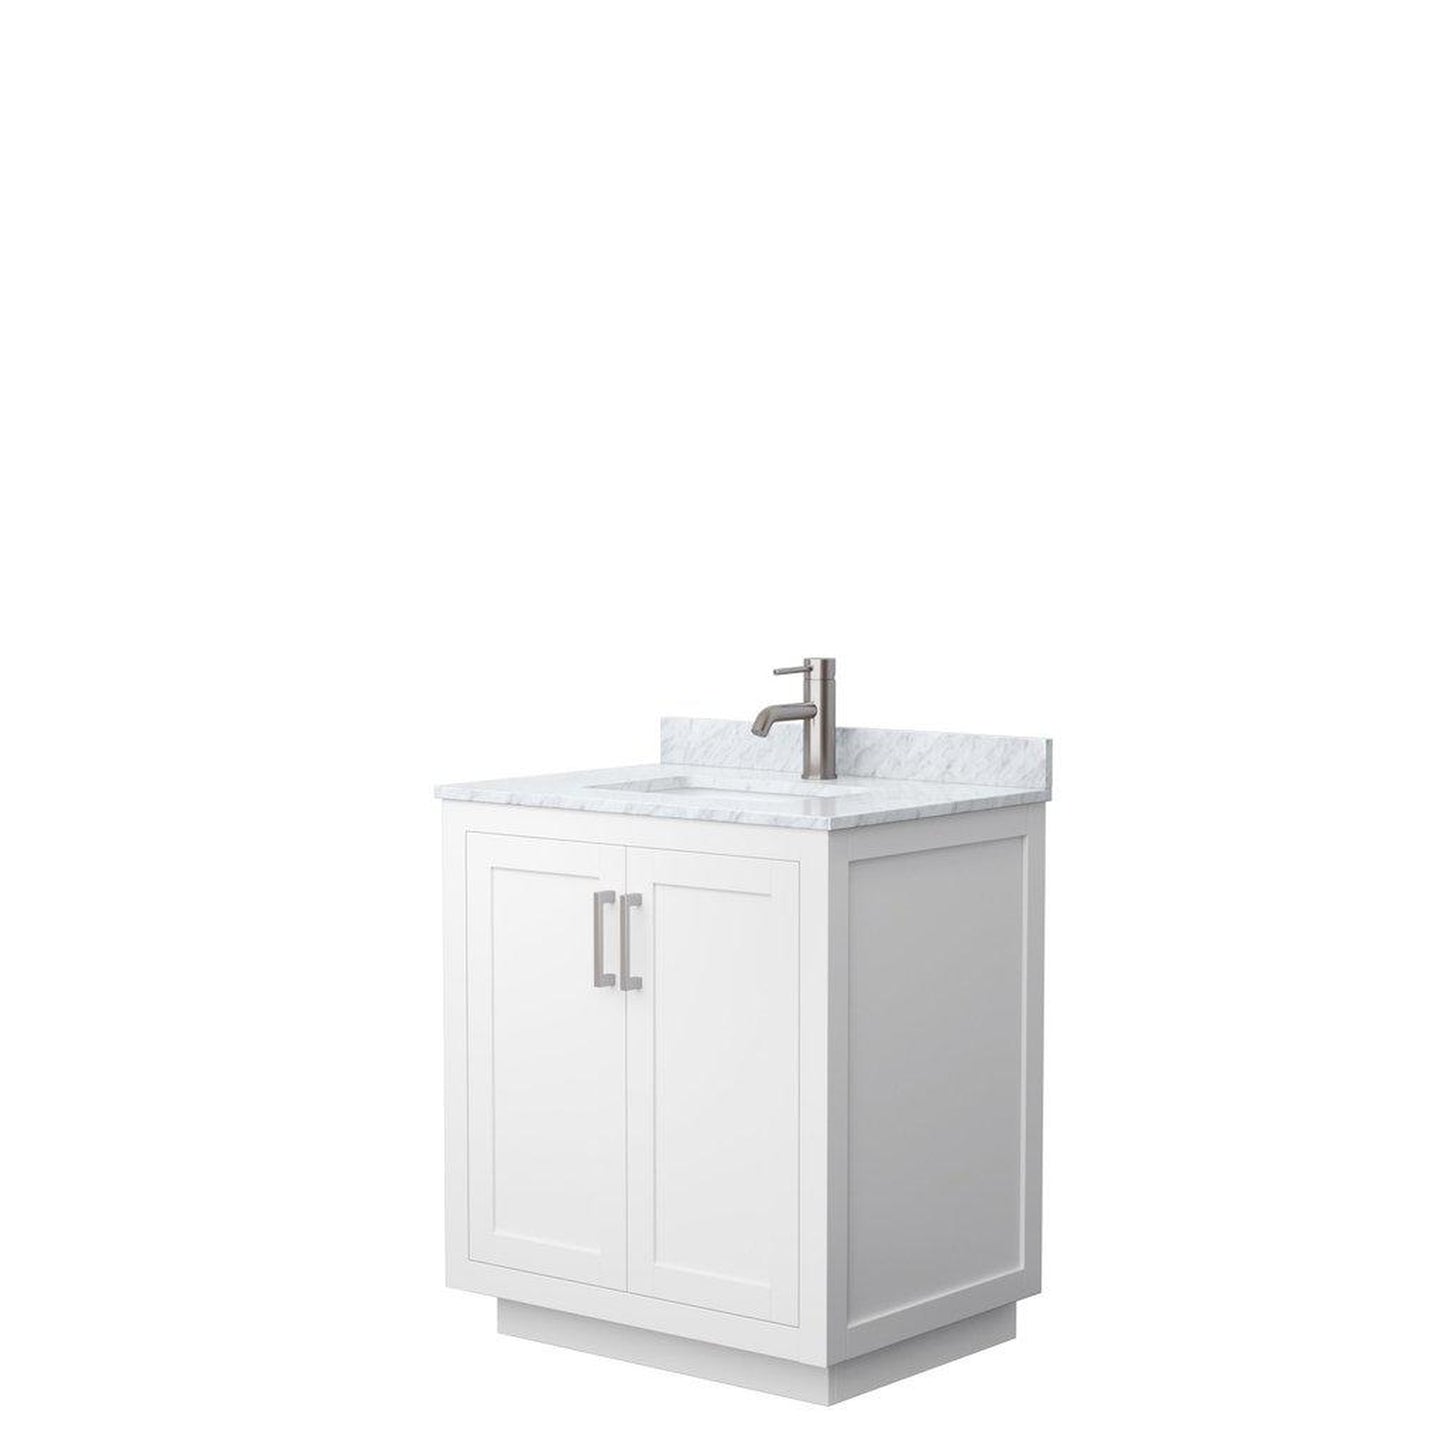 Wyndham Collection Miranda 30" Single Bathroom White Vanity Set With White Carrara Marble Countertop, Undermount Square Sink, And Brushed Nickel Trim